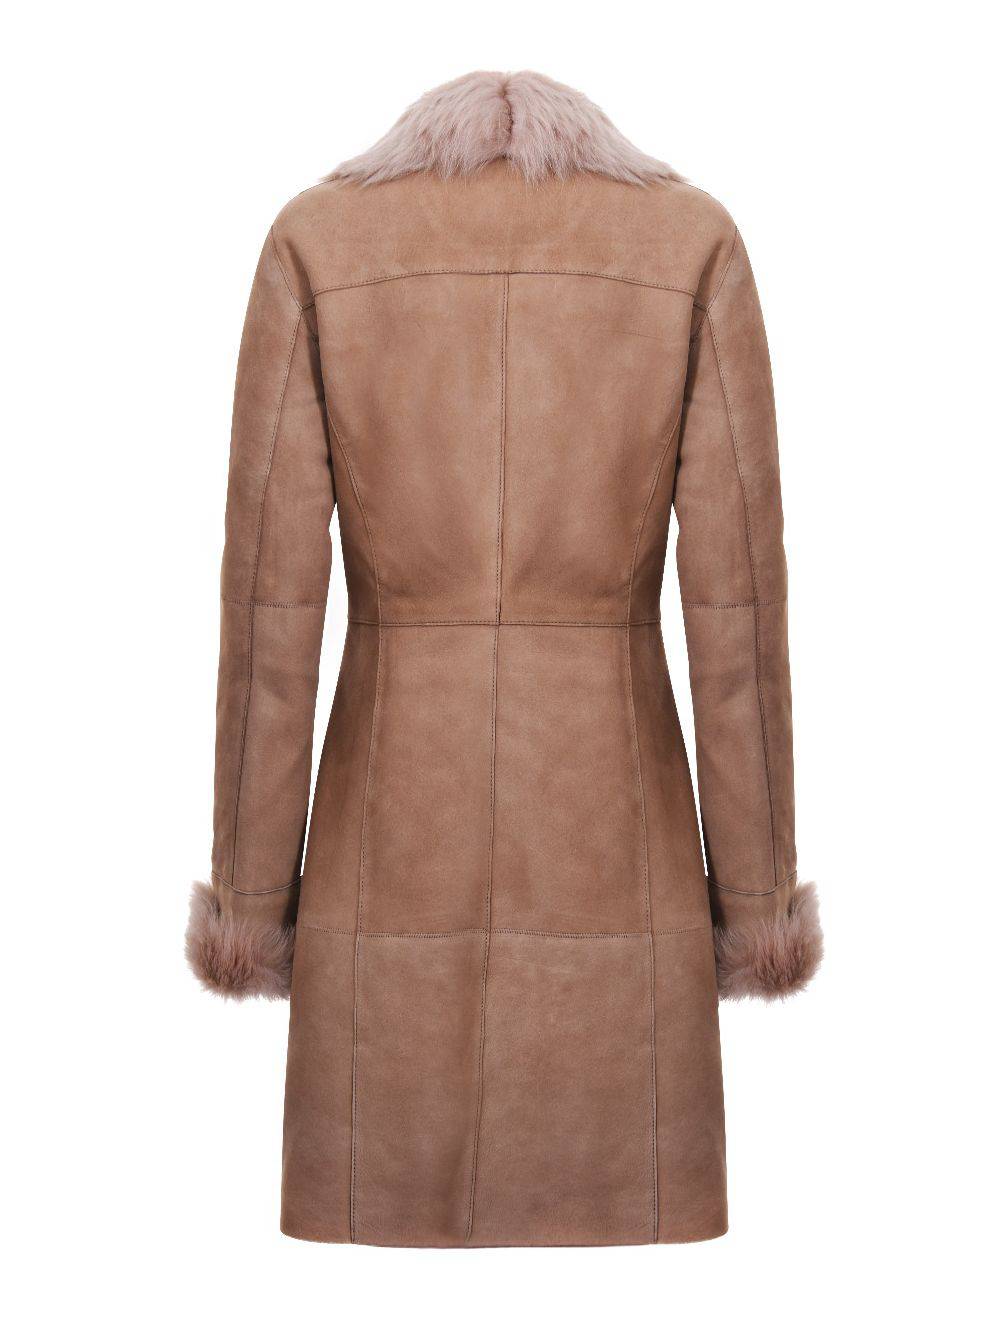 Ladies Caramel Suede Merino Shearling Sheepskin Coat with Toscana Collar for sale - Woodcock and Cavendish